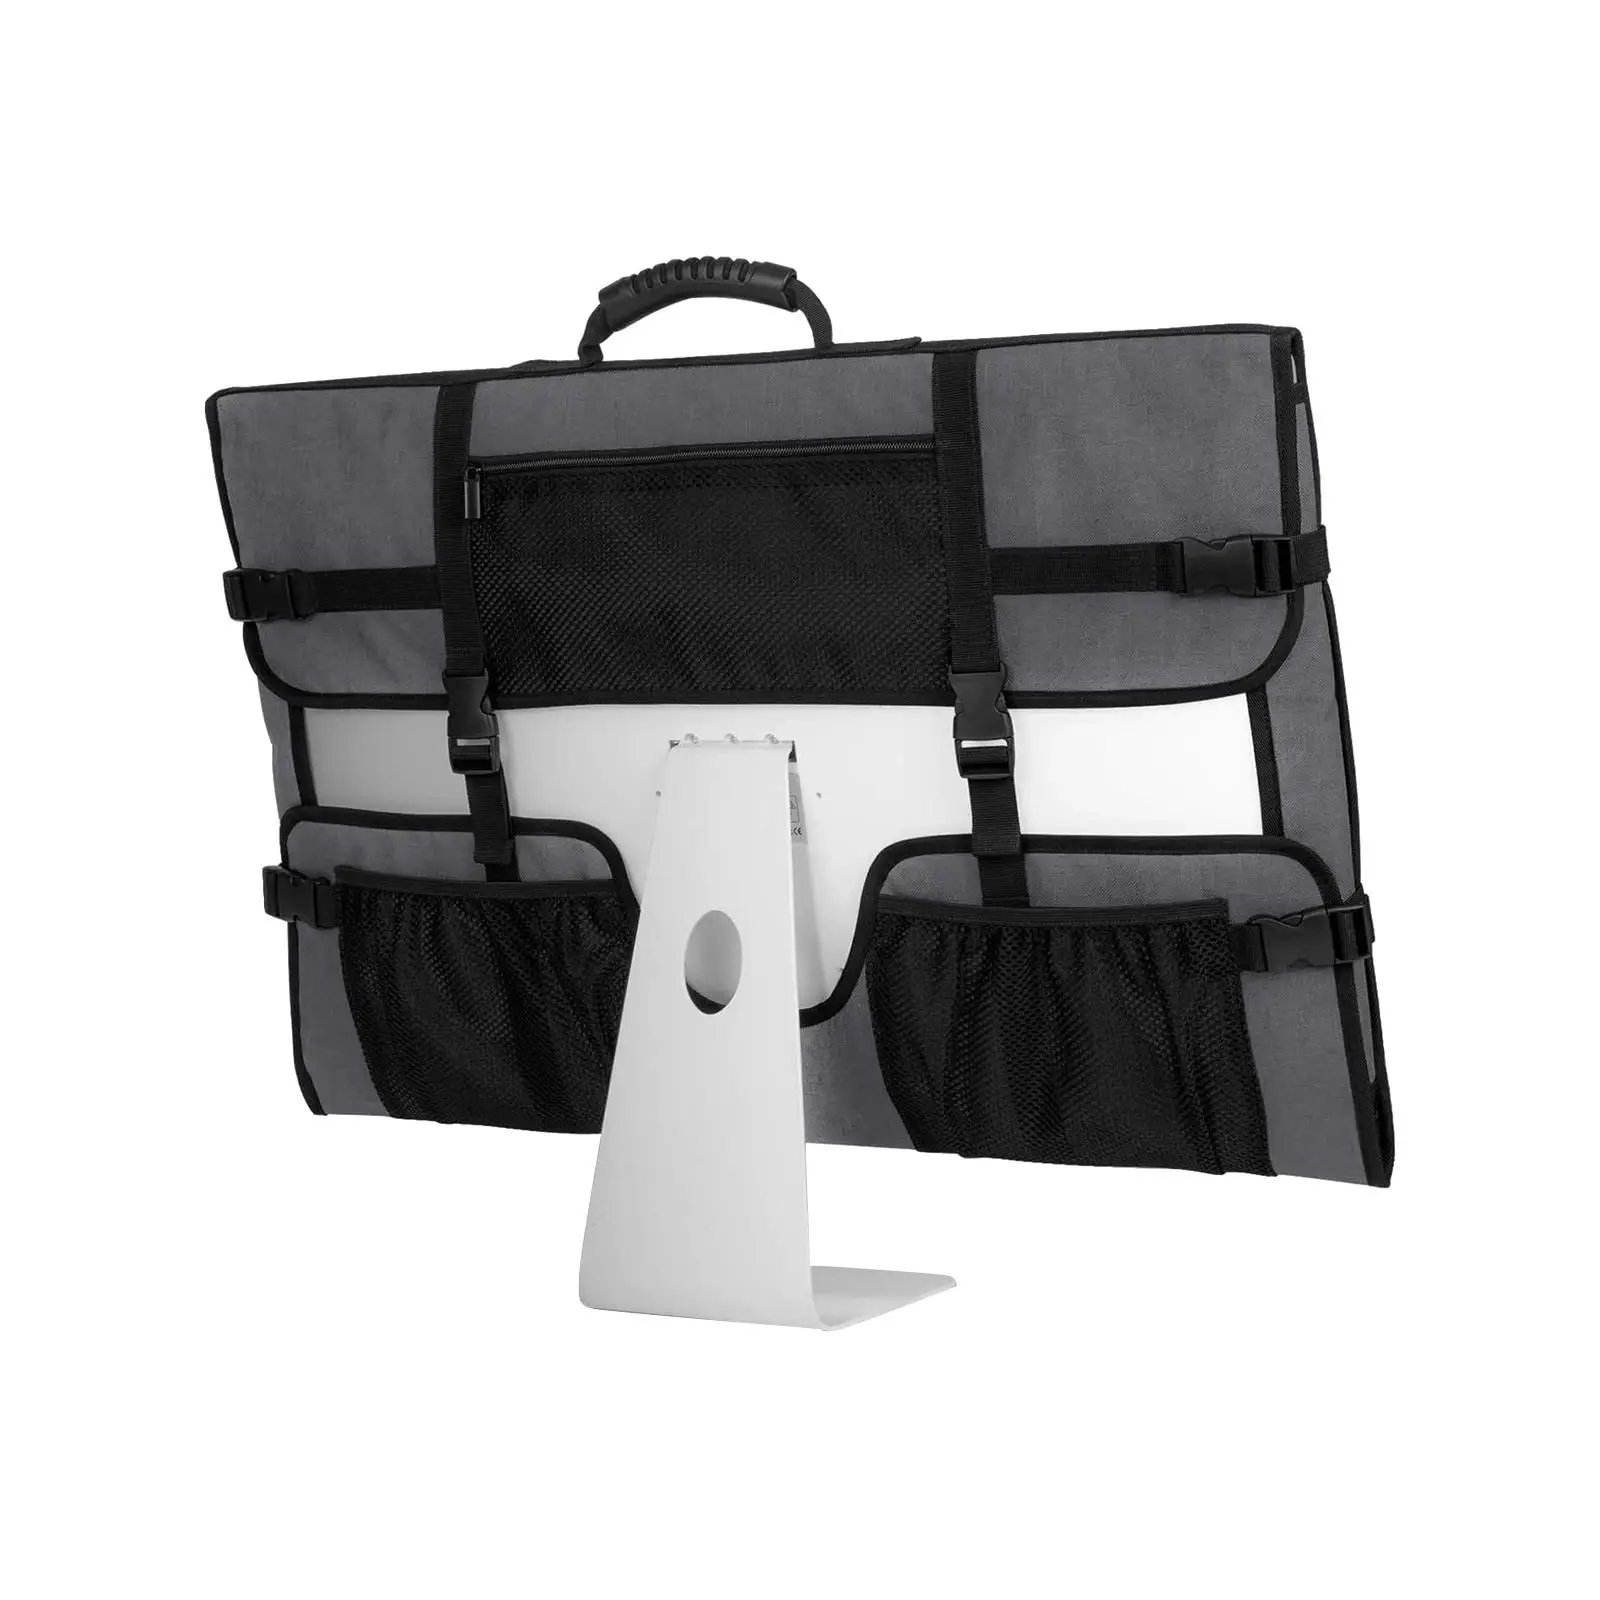 27inch Monitor Carrying Case Adjustable Buckle Anti Scratch Padded Travel Carrying Bag Protective Case for Desktop Computer